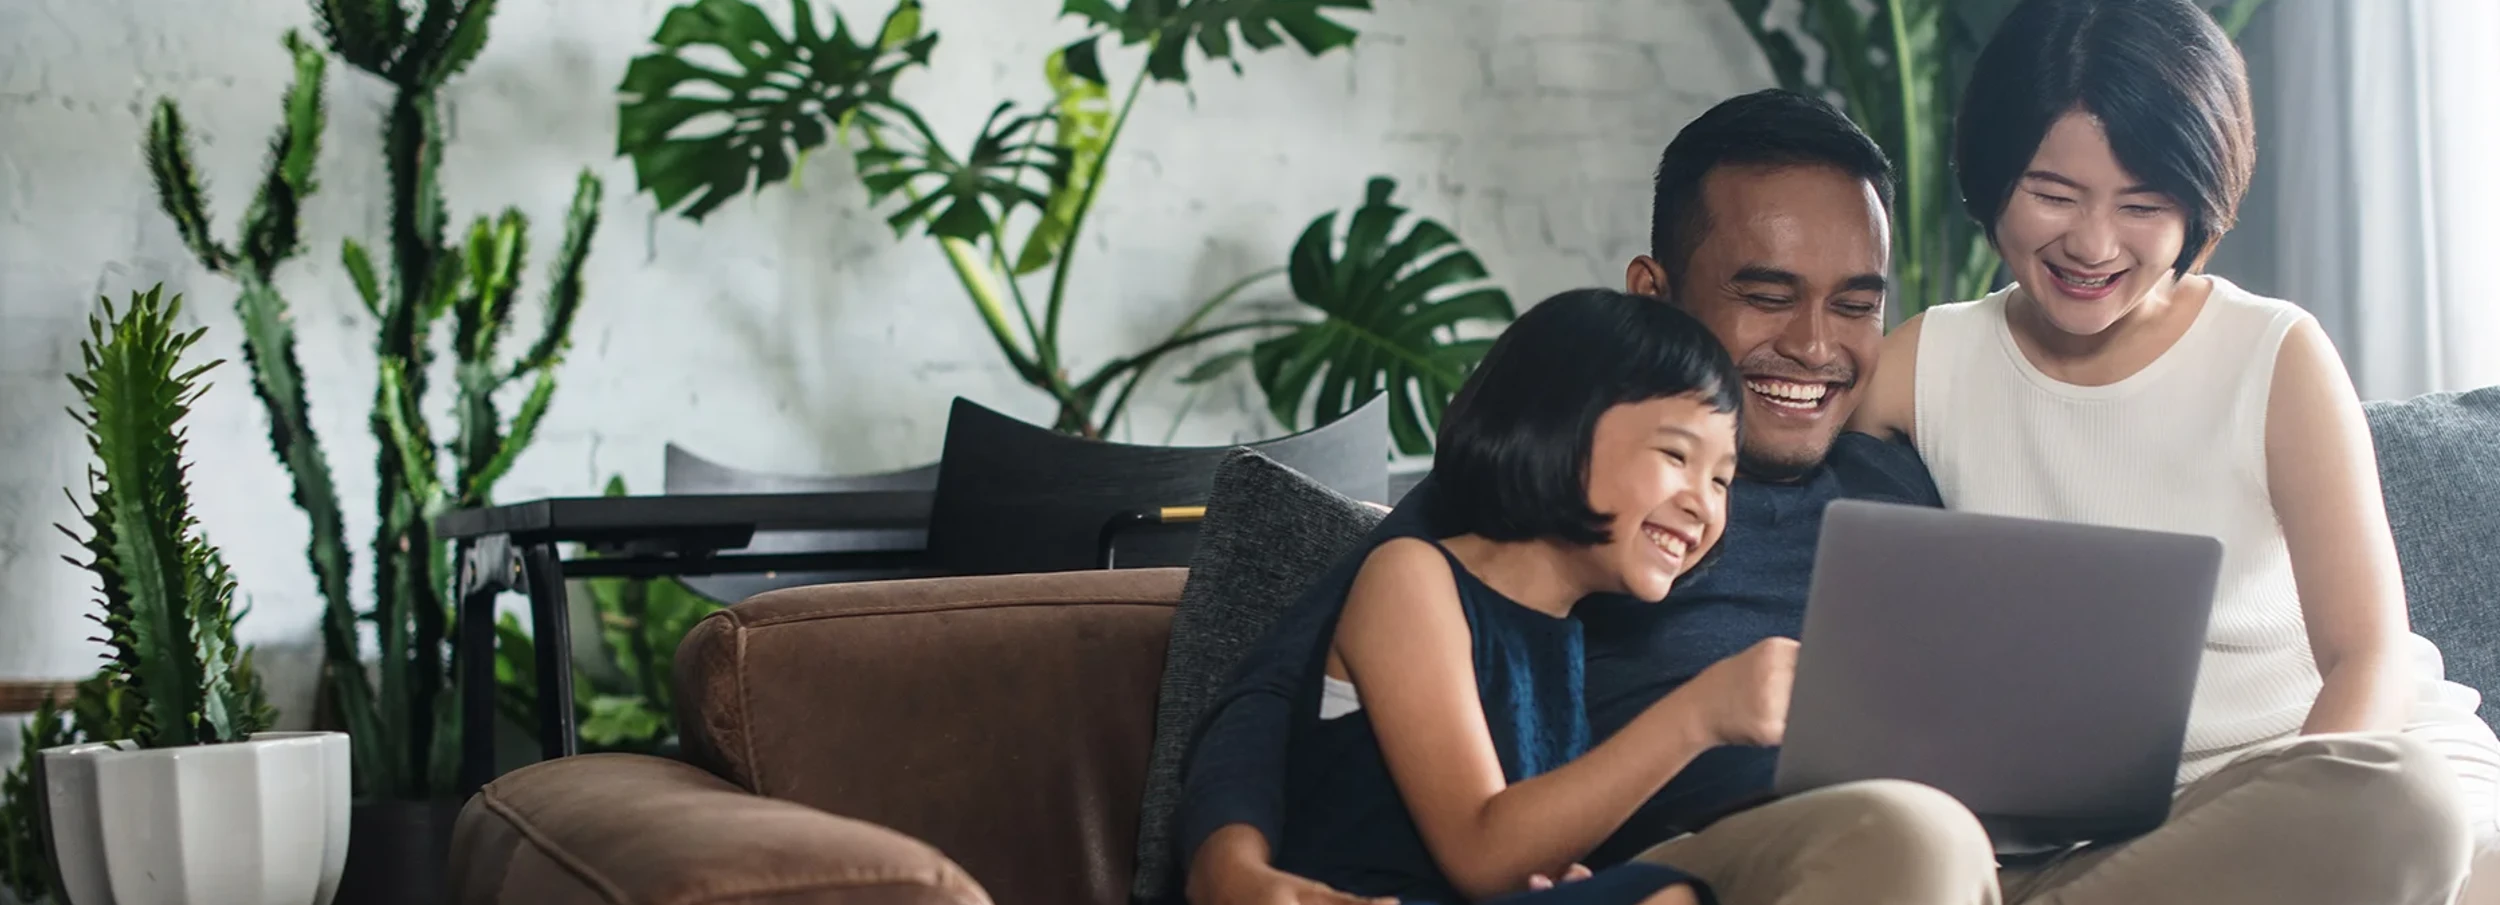 Smiling Asian couple and young daughter pointing and staring at laptop on couch in living room decorated with plants.